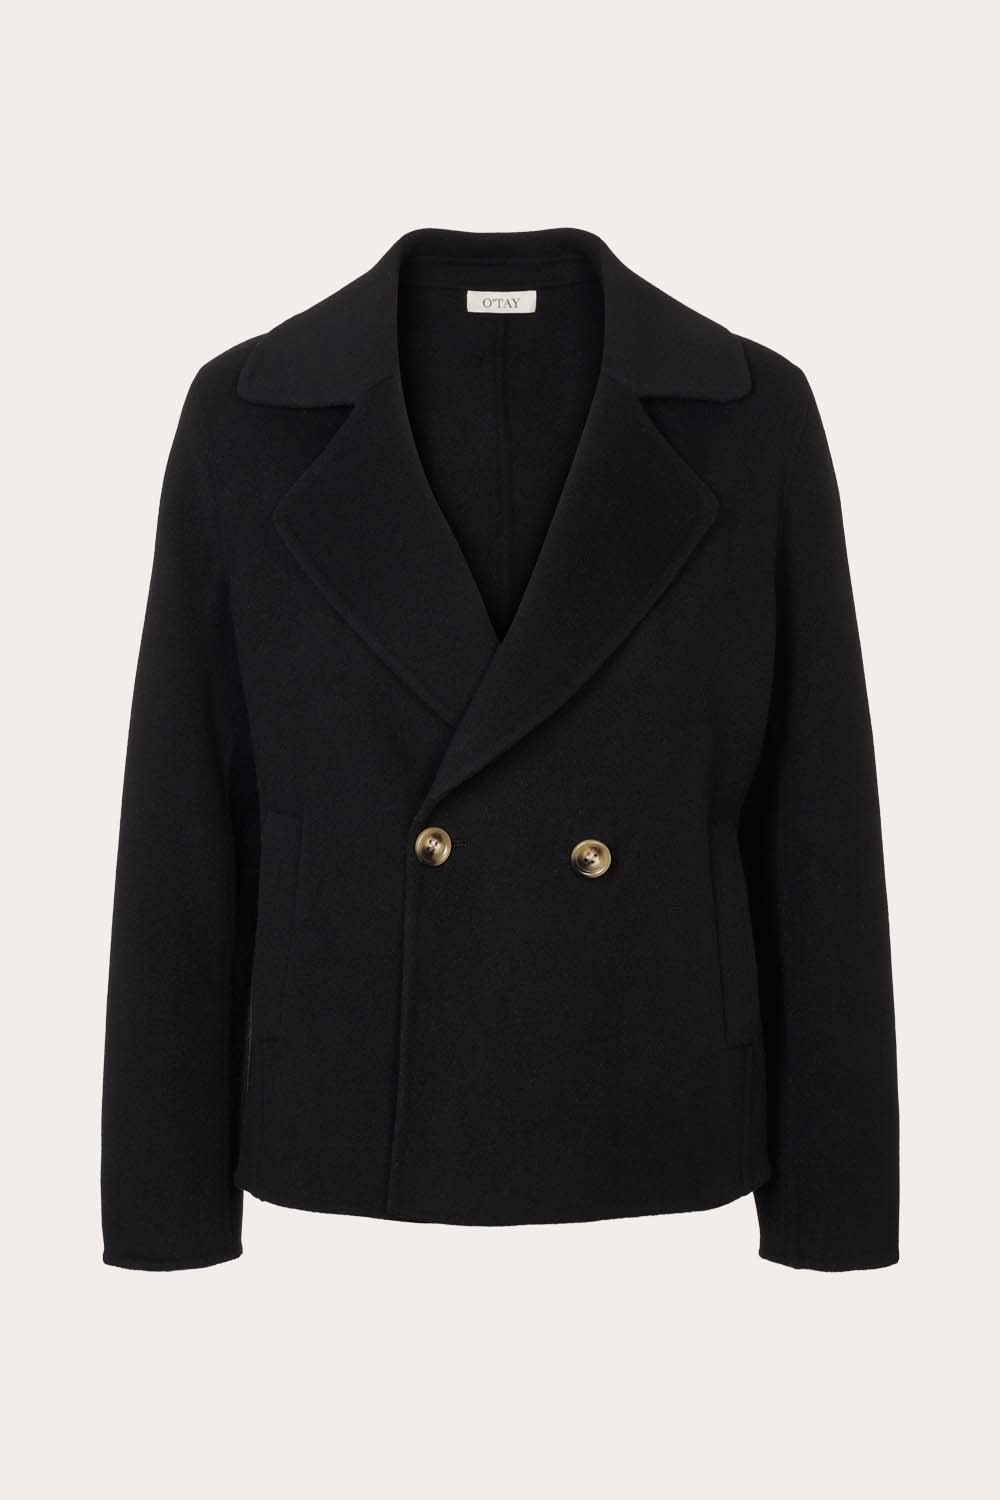 Outerwear | Cashmere coats for women | Luxurious materials – otay.no